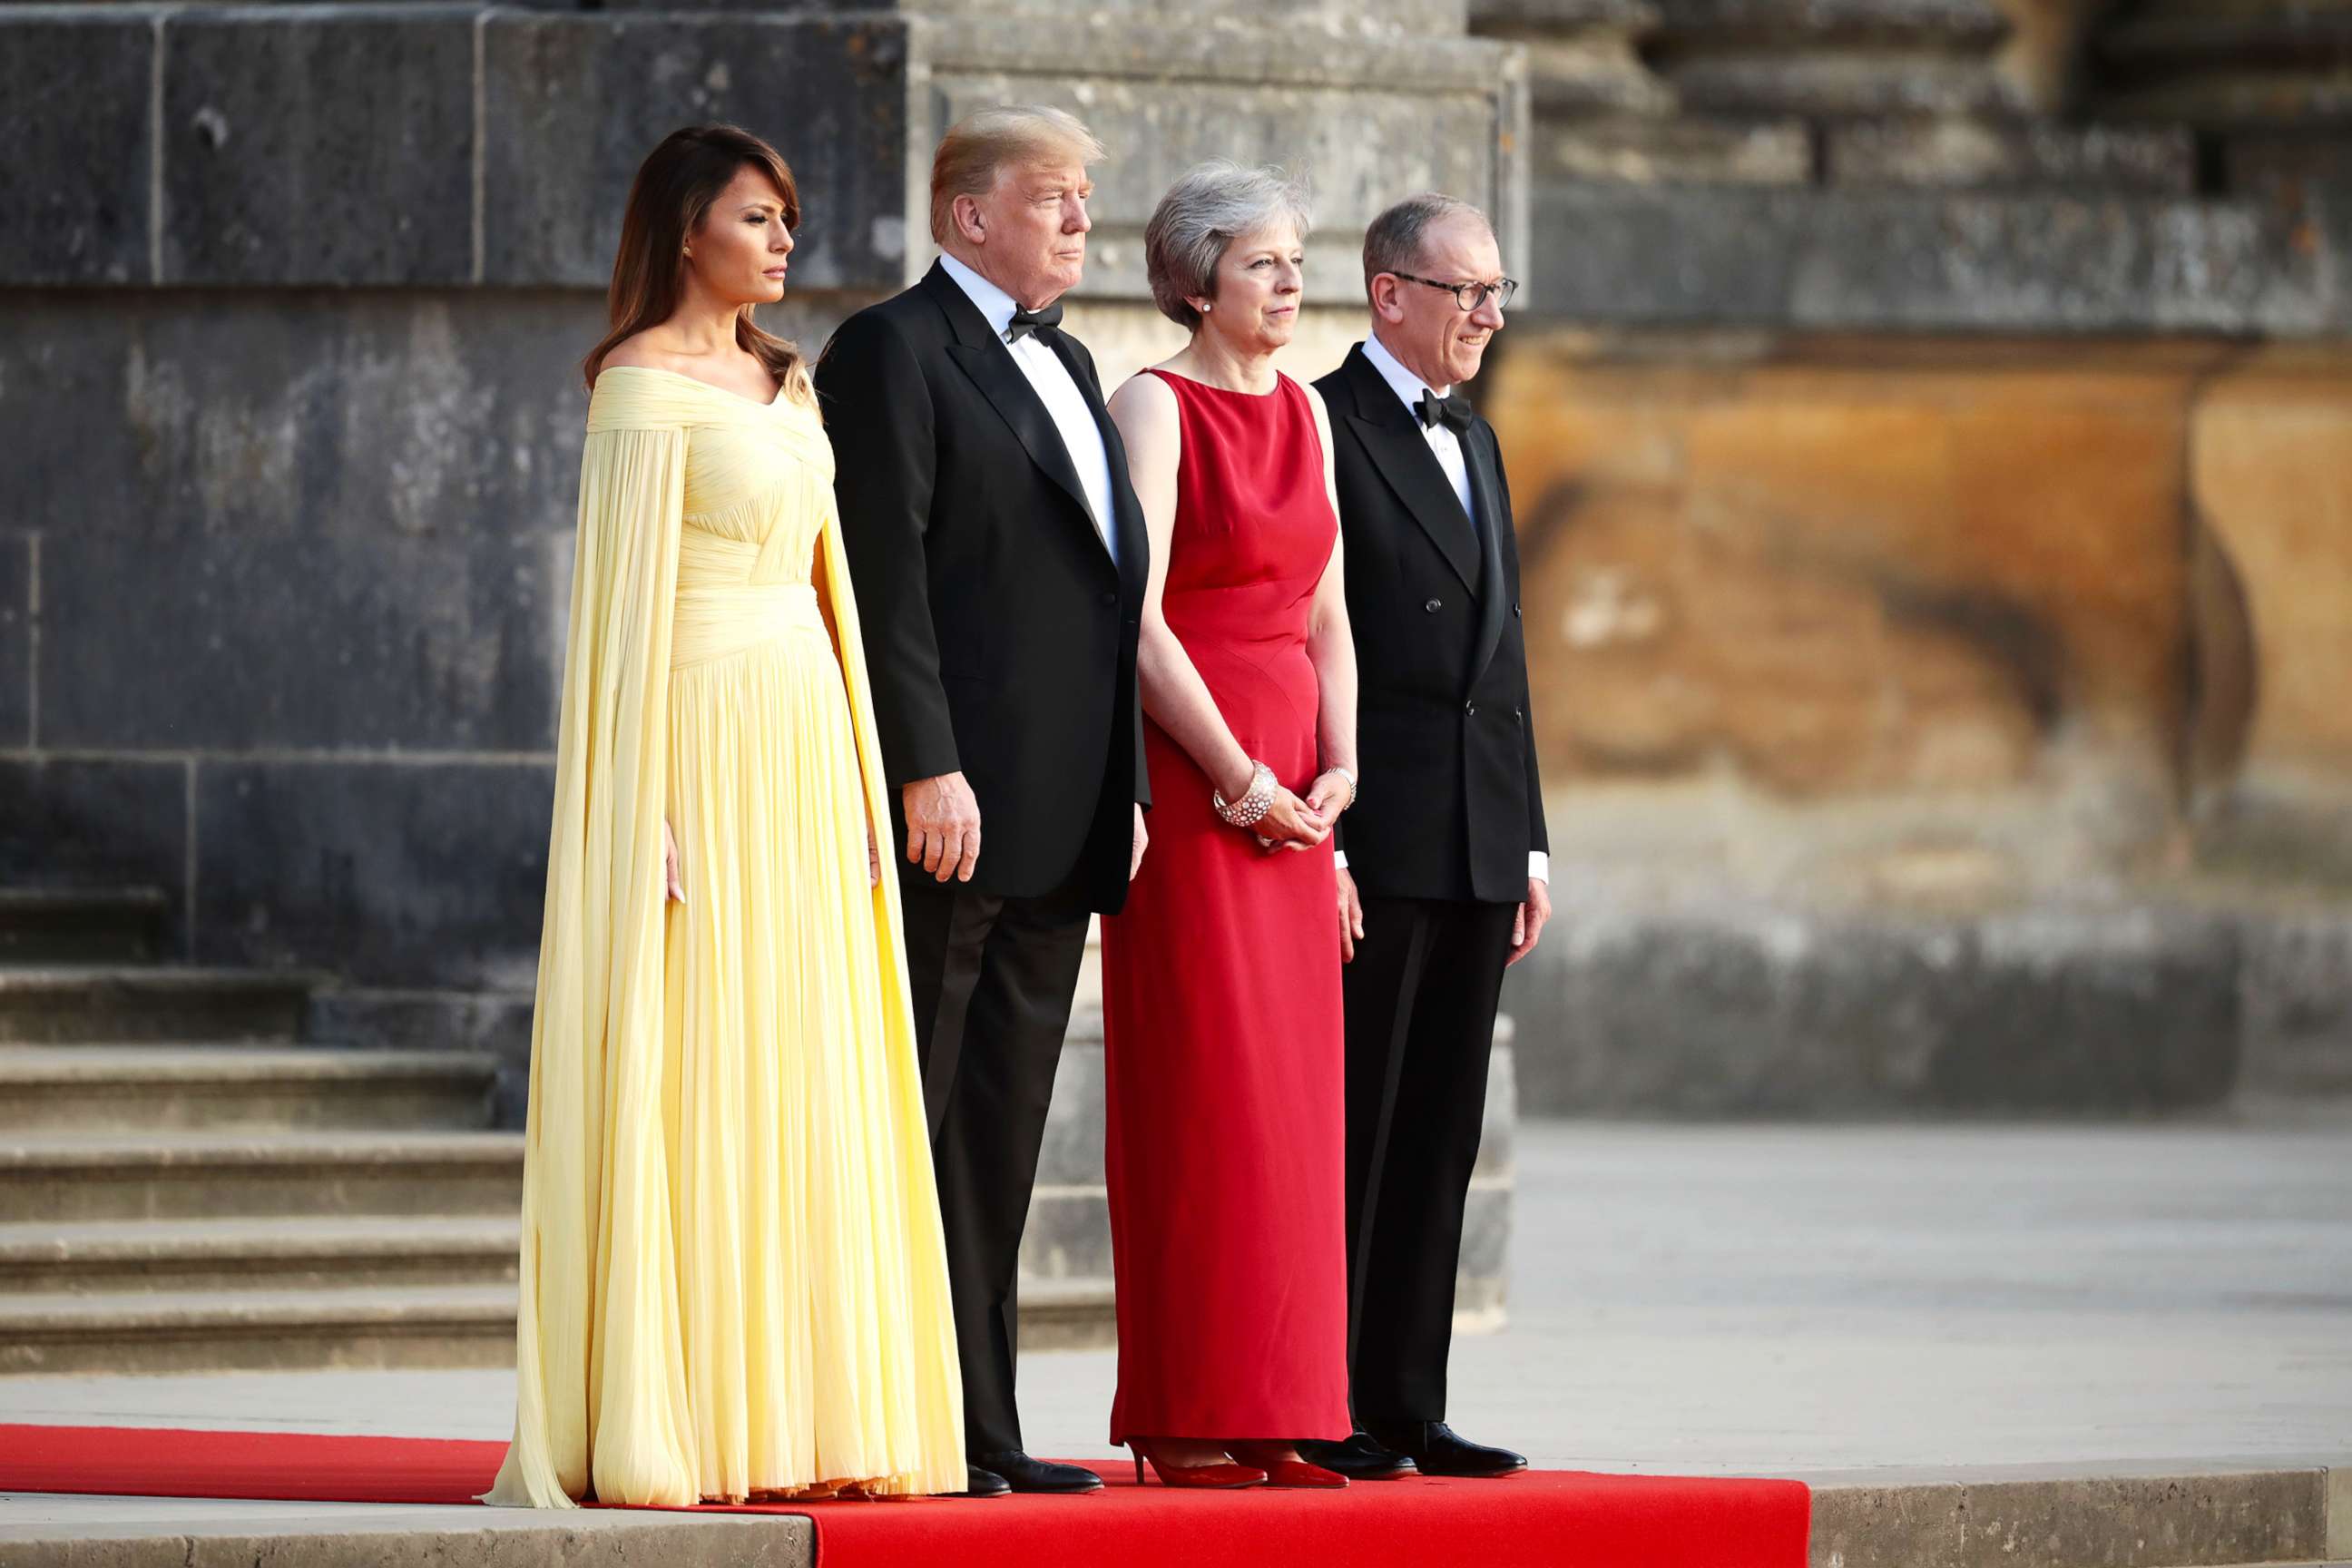 PHOTO: Britain's Prime Minister Theresa May and her husband Philip May greet President Donald Trump and First Lady Melania Trump at Blenheim Palace on July 12, 2018 in Woodstock, England.